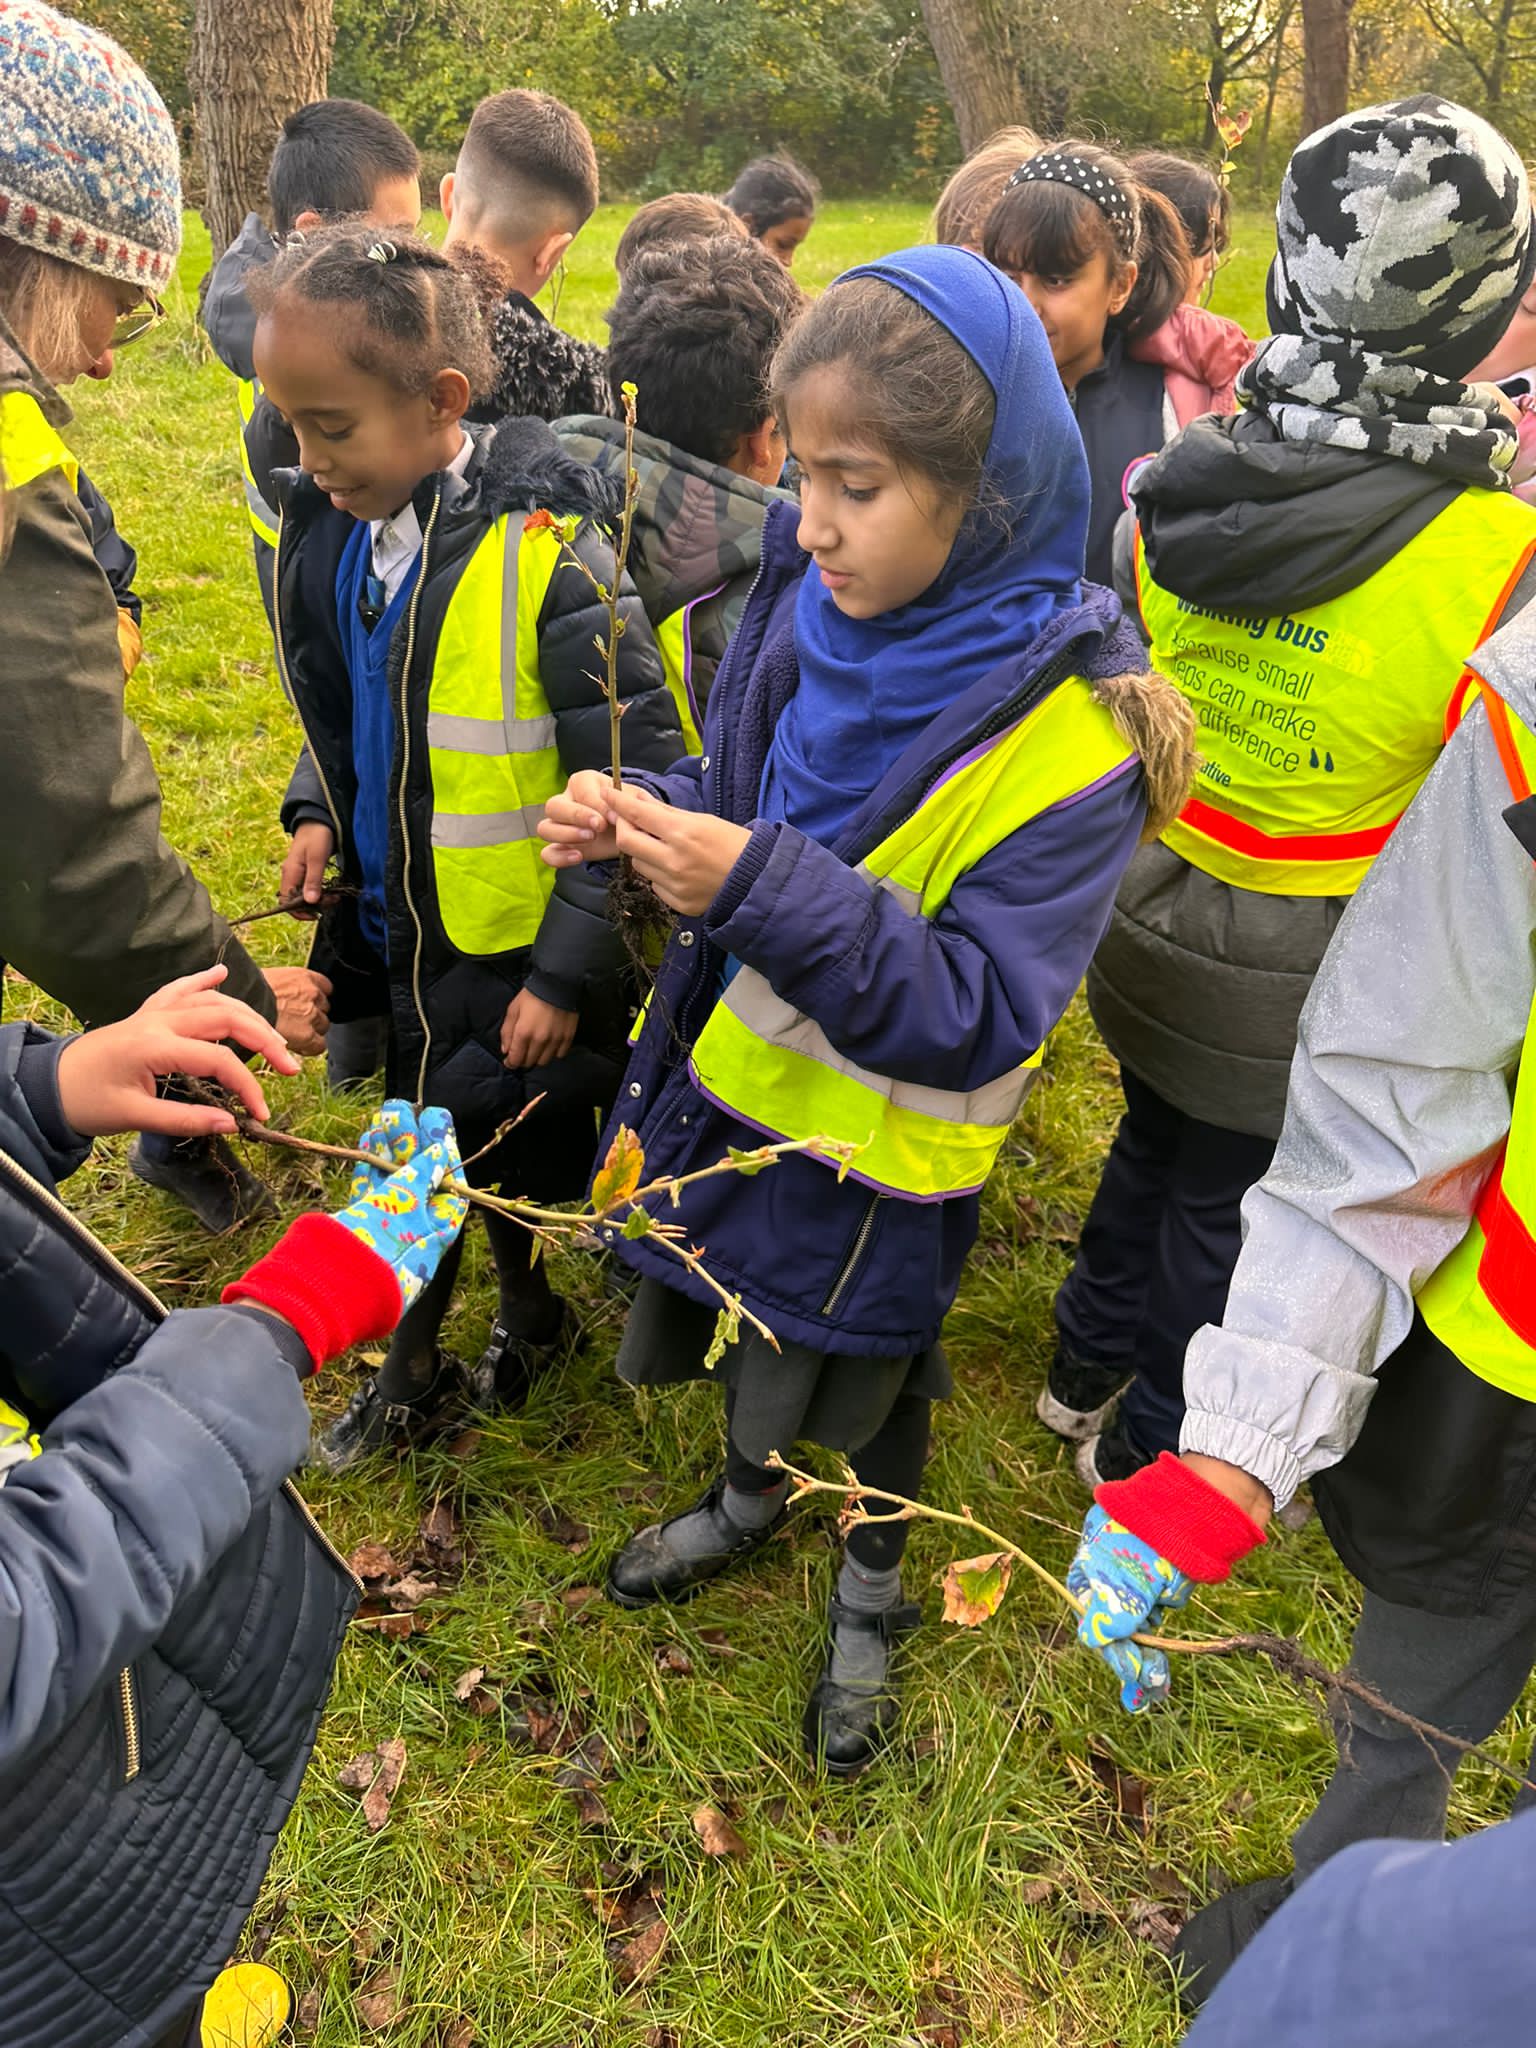 Year 4 from St Silas School planting bulbs. Picture by: Tracey Dunn